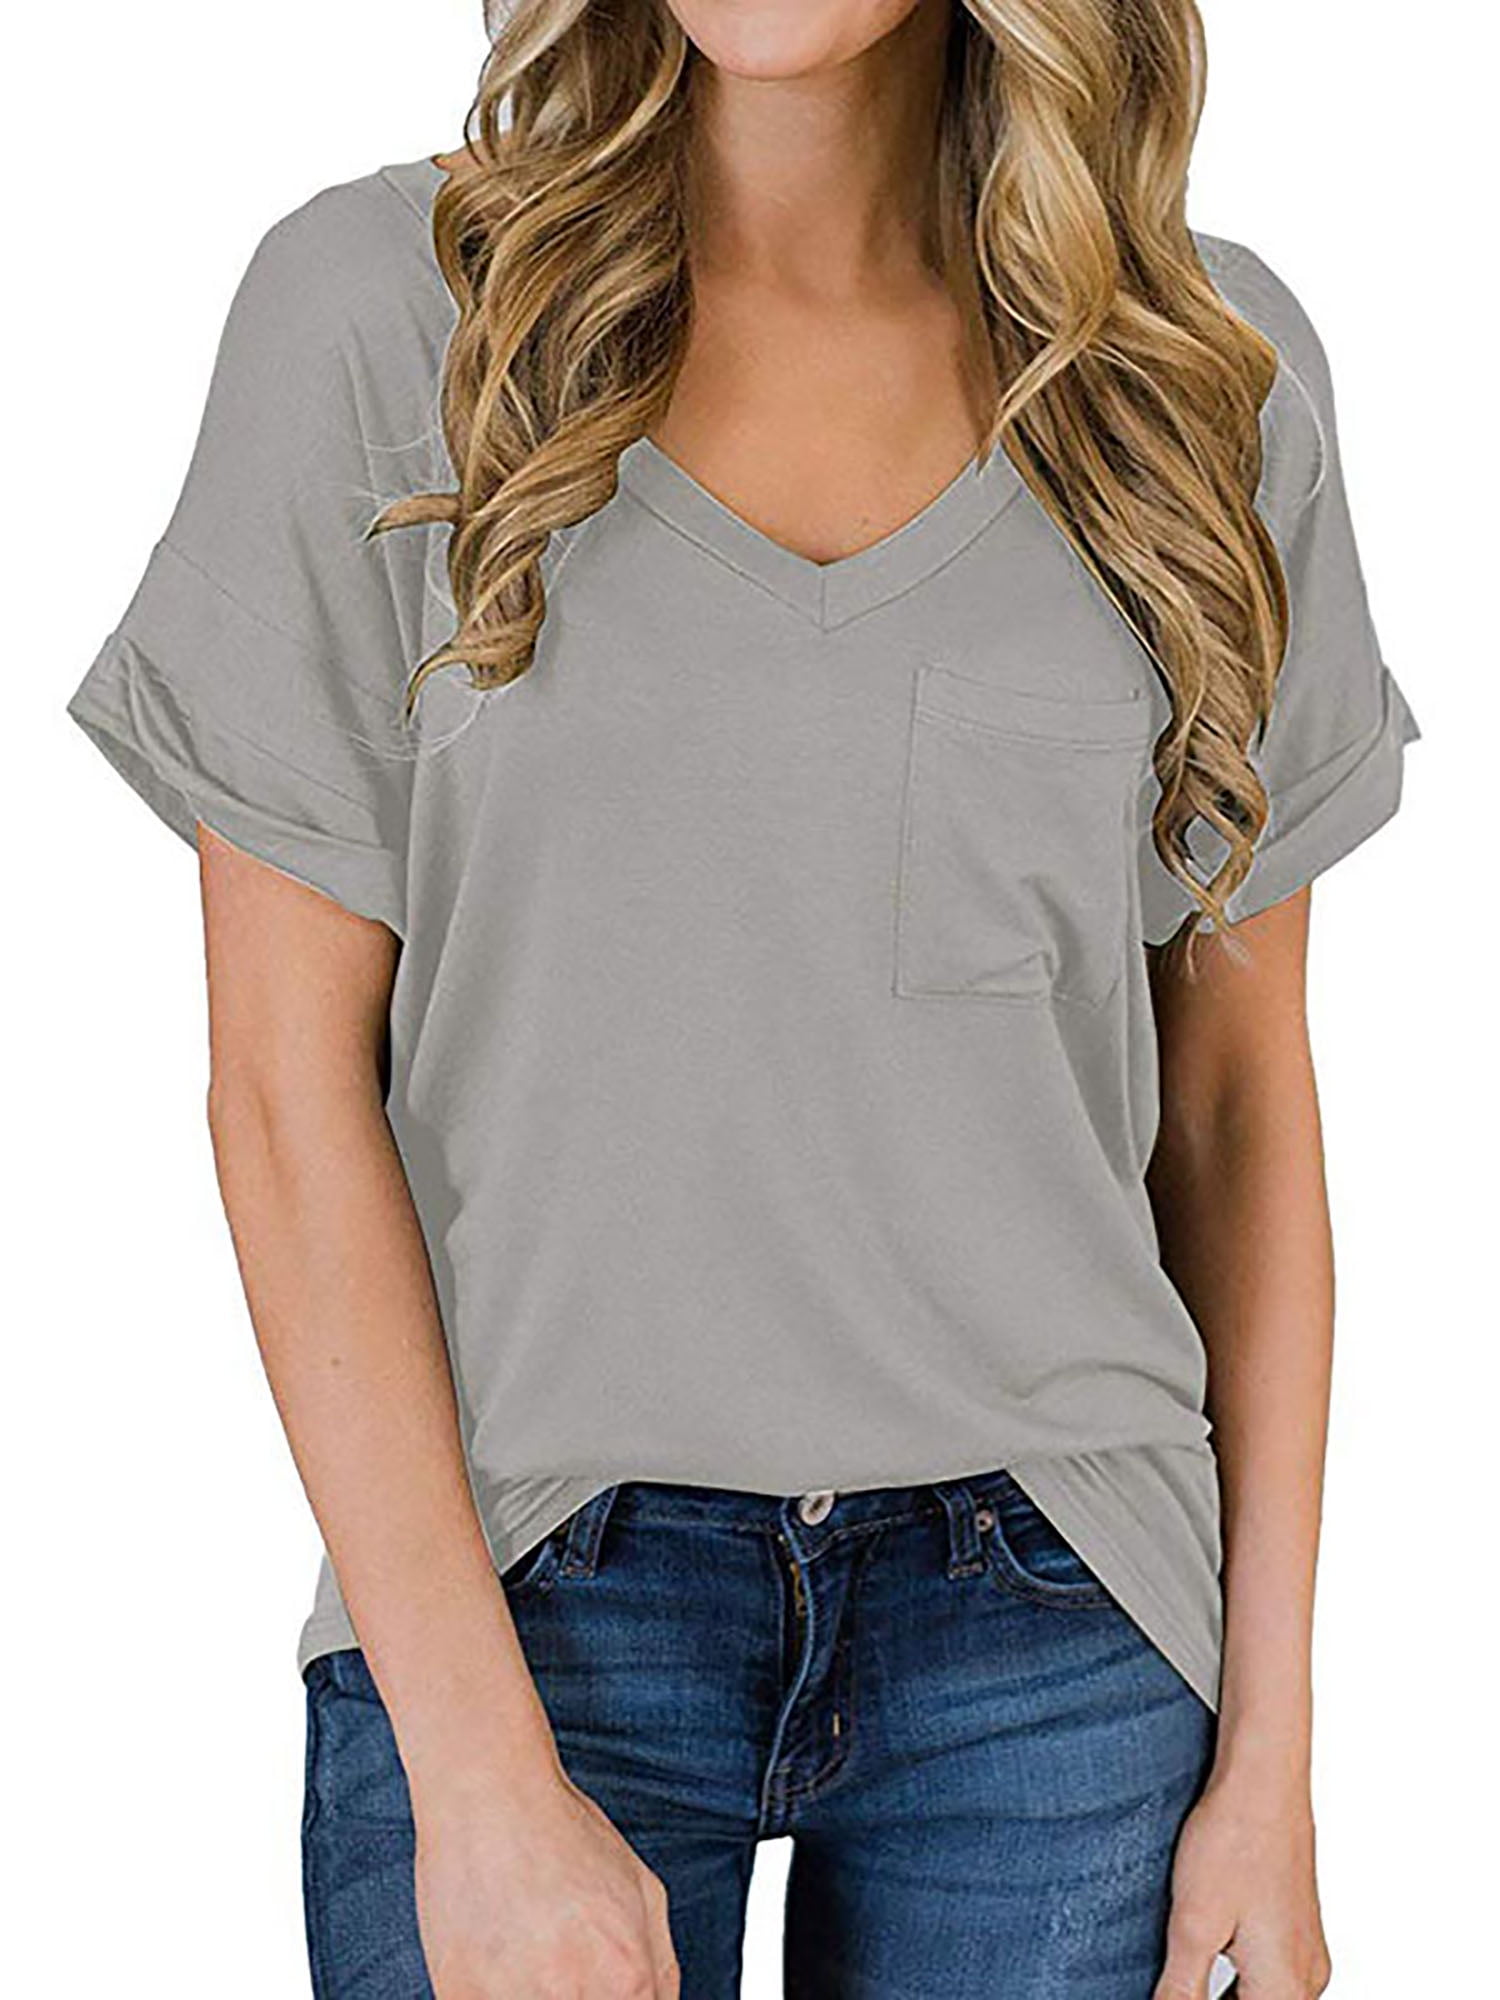 Womens Solid Color Short Sleeve Blouses Asymmetrical Hemline Tops Flowy Loose T-Shirts 